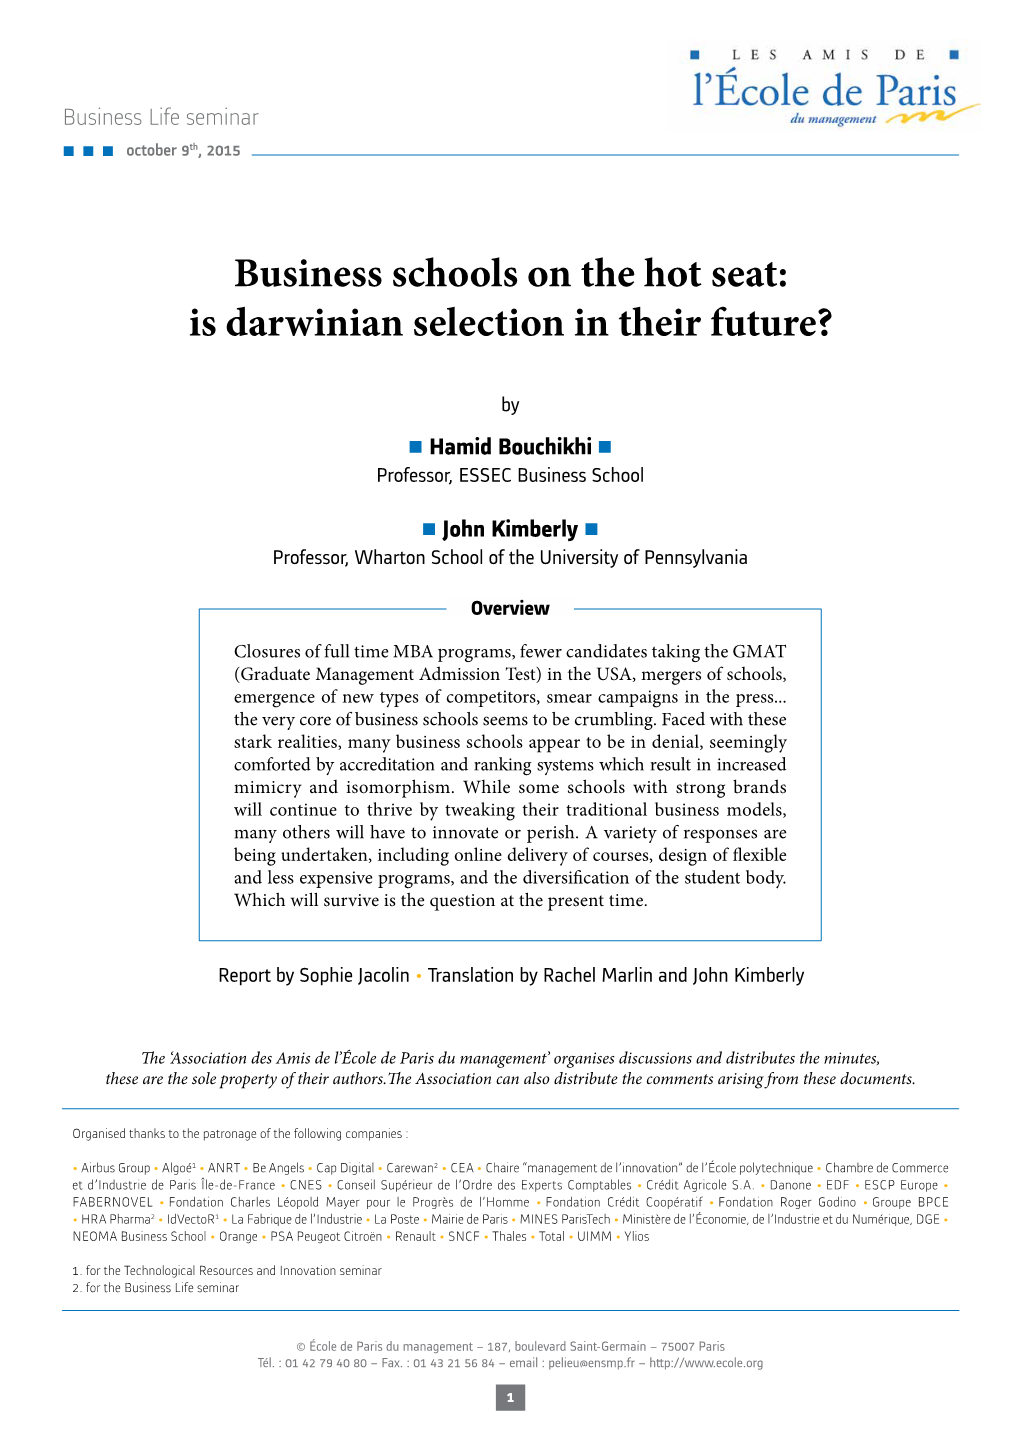 Business Schools on the Hot Seat: Is Darwinian Selection in Their Future?